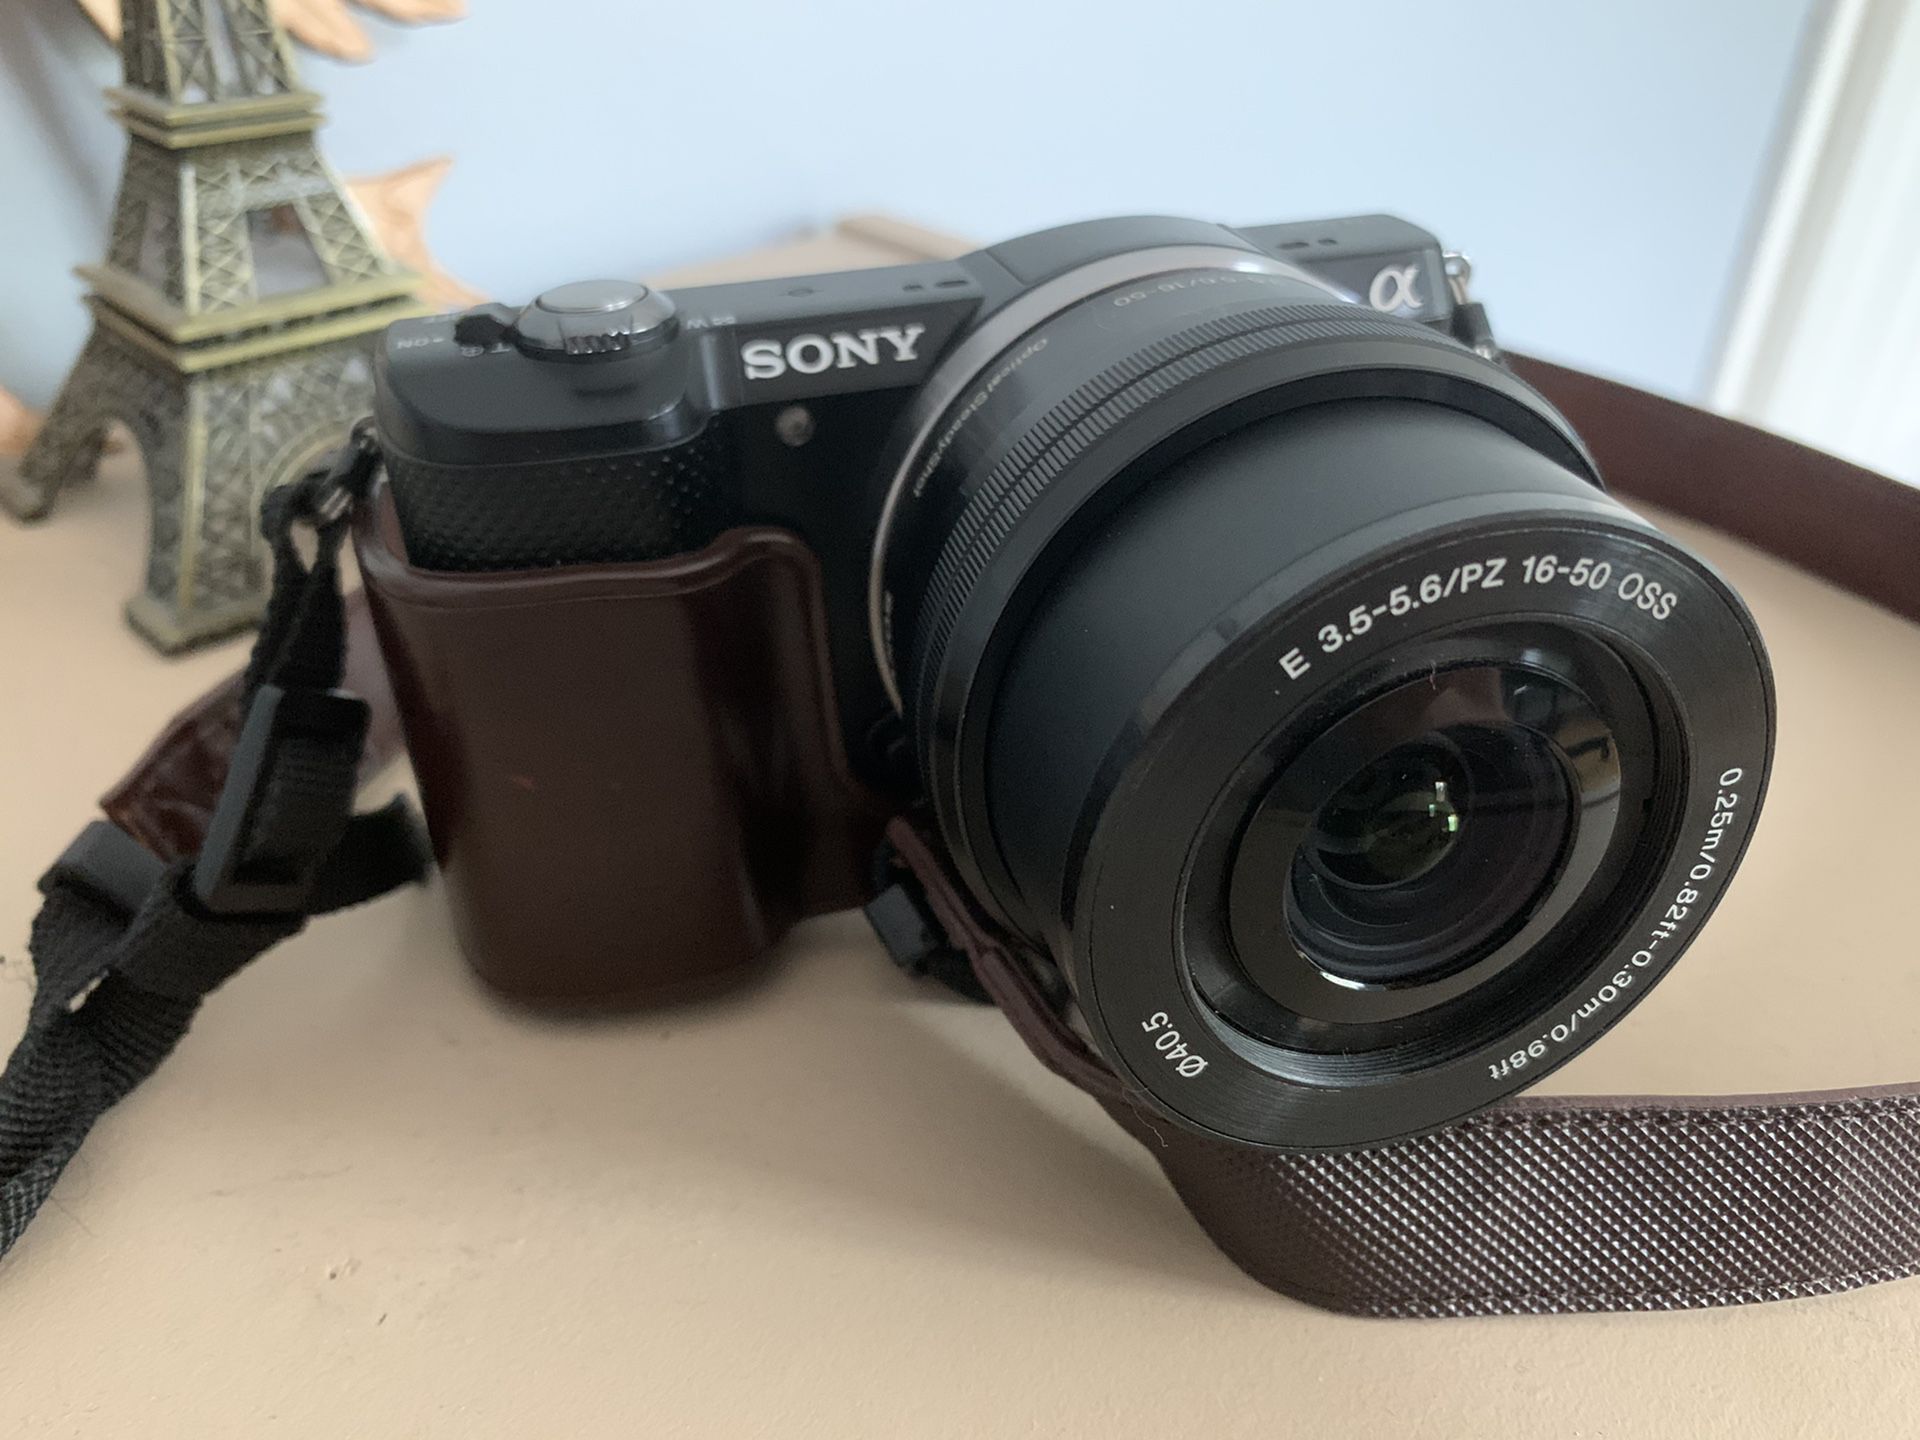 Sony a5000 with 16-50mm lens and vintage leather case